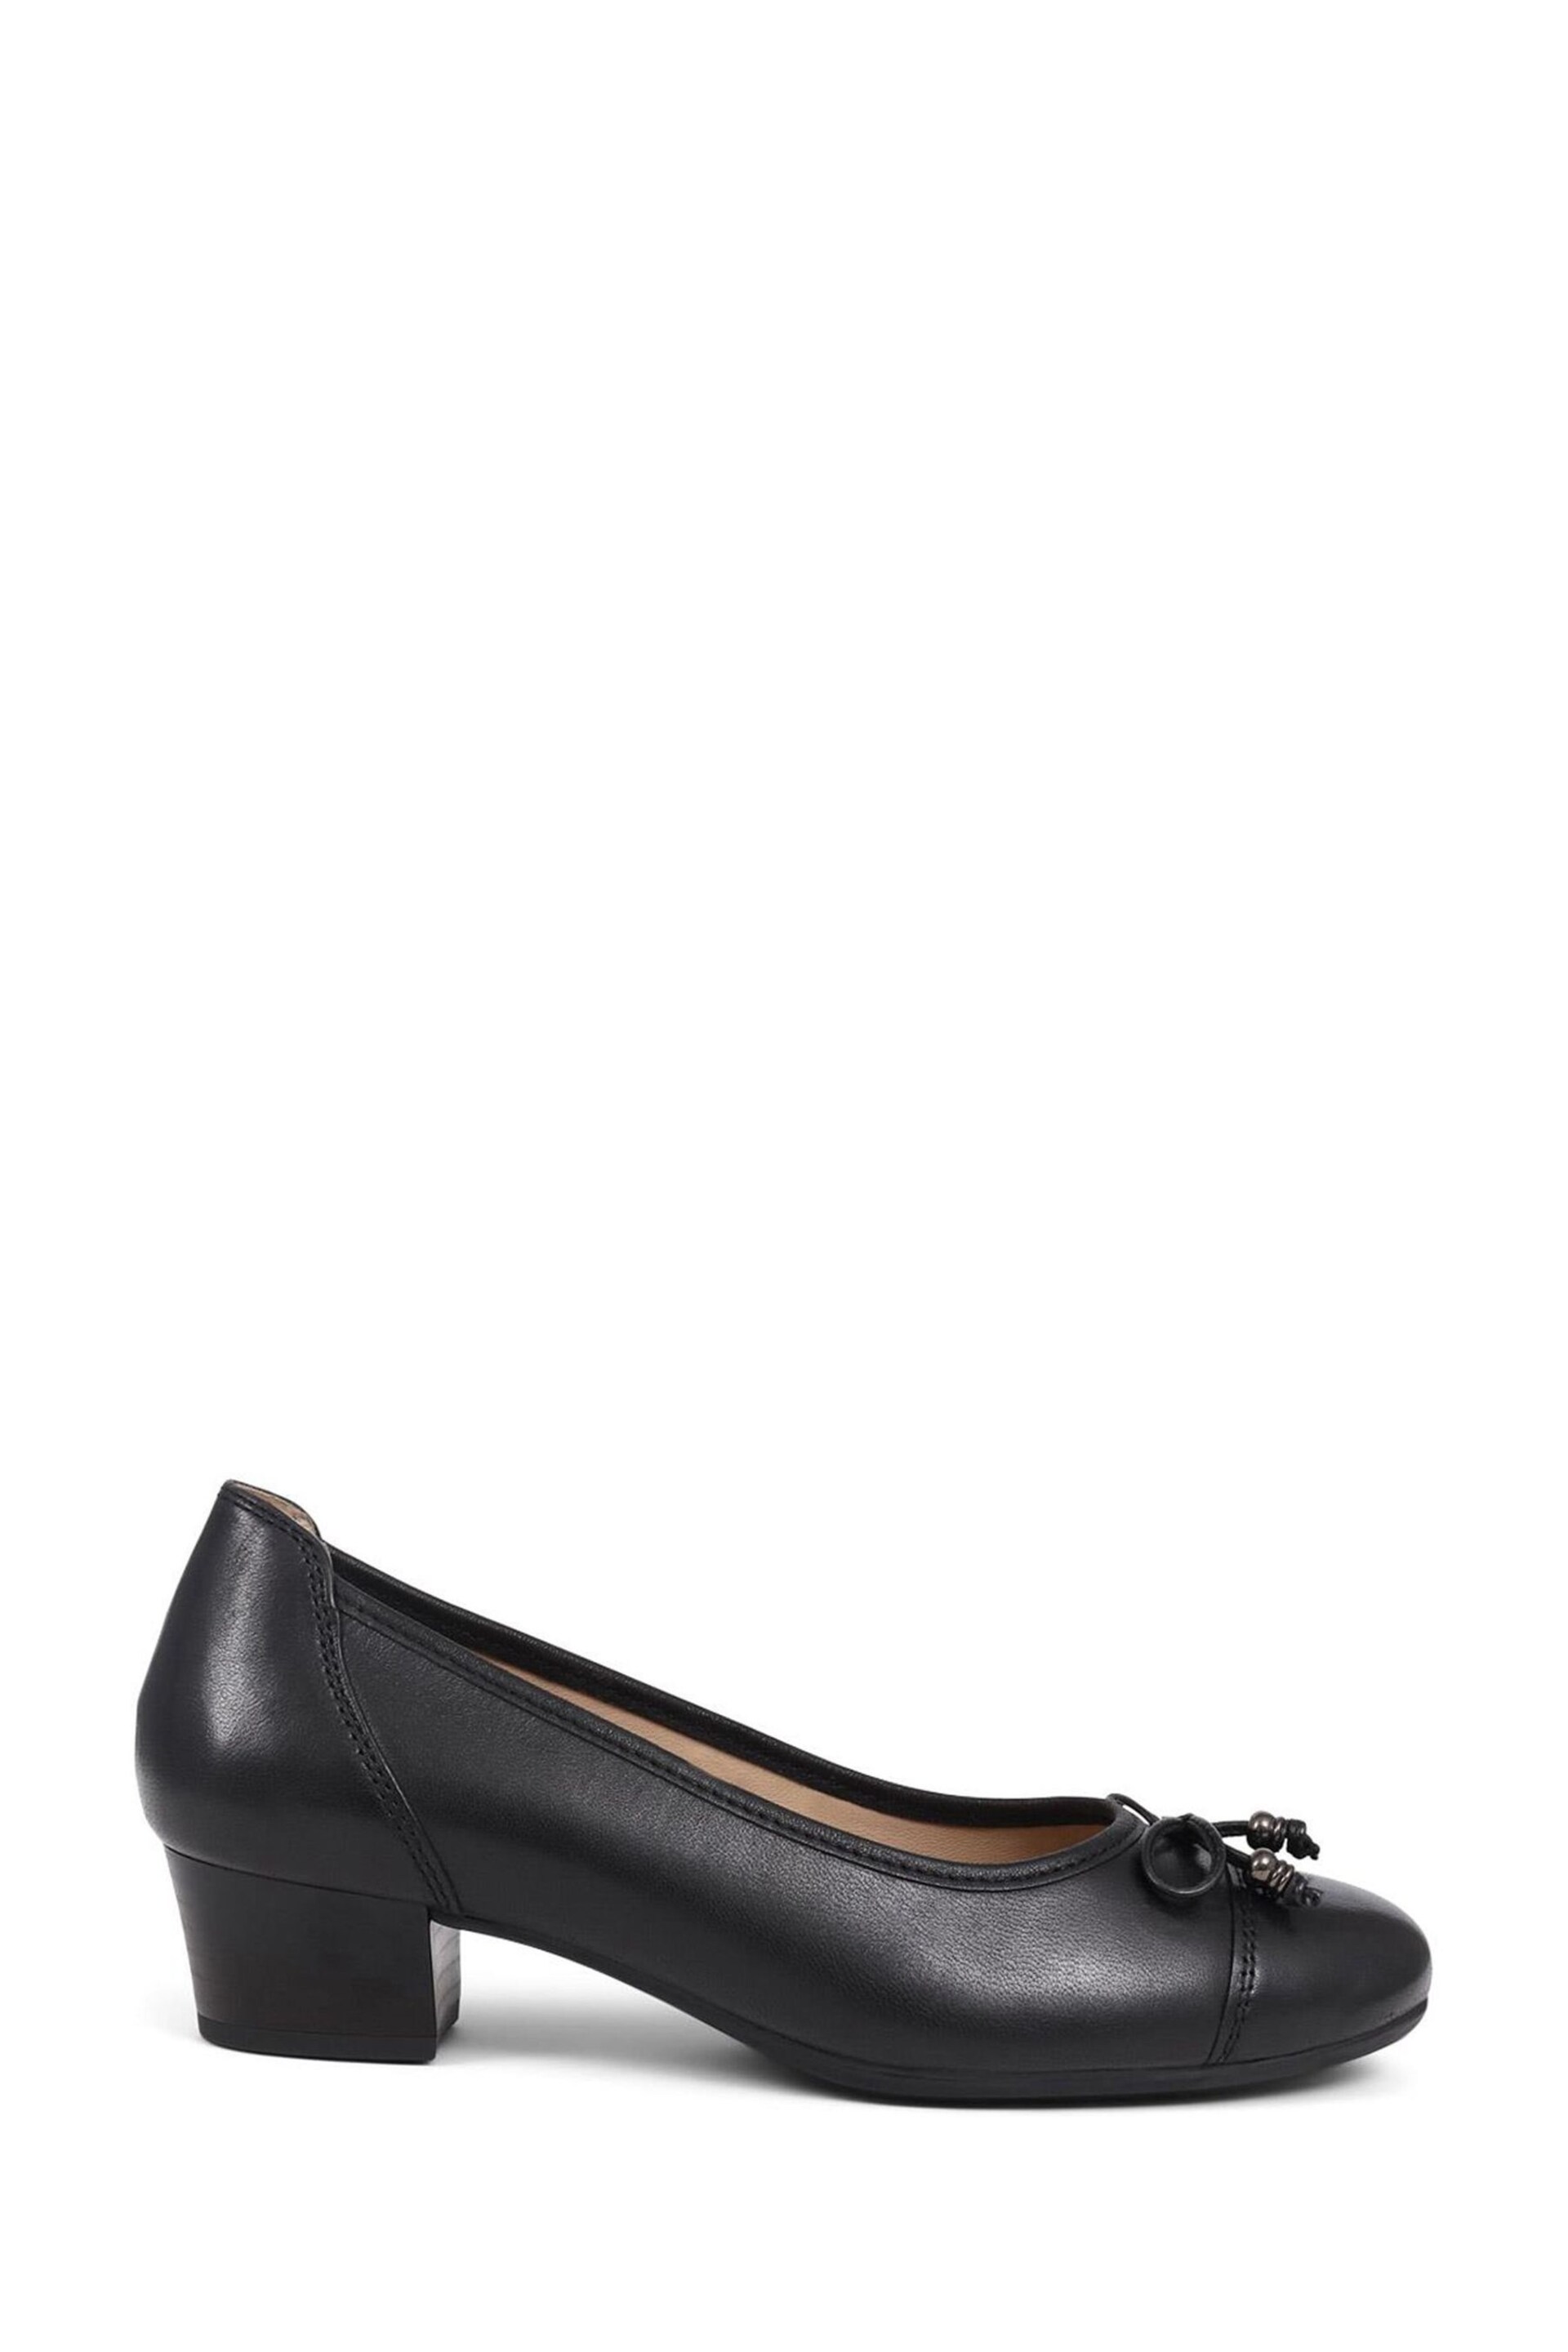 Pavers Leather Block Heel Court Black Shoes - Image 1 of 5